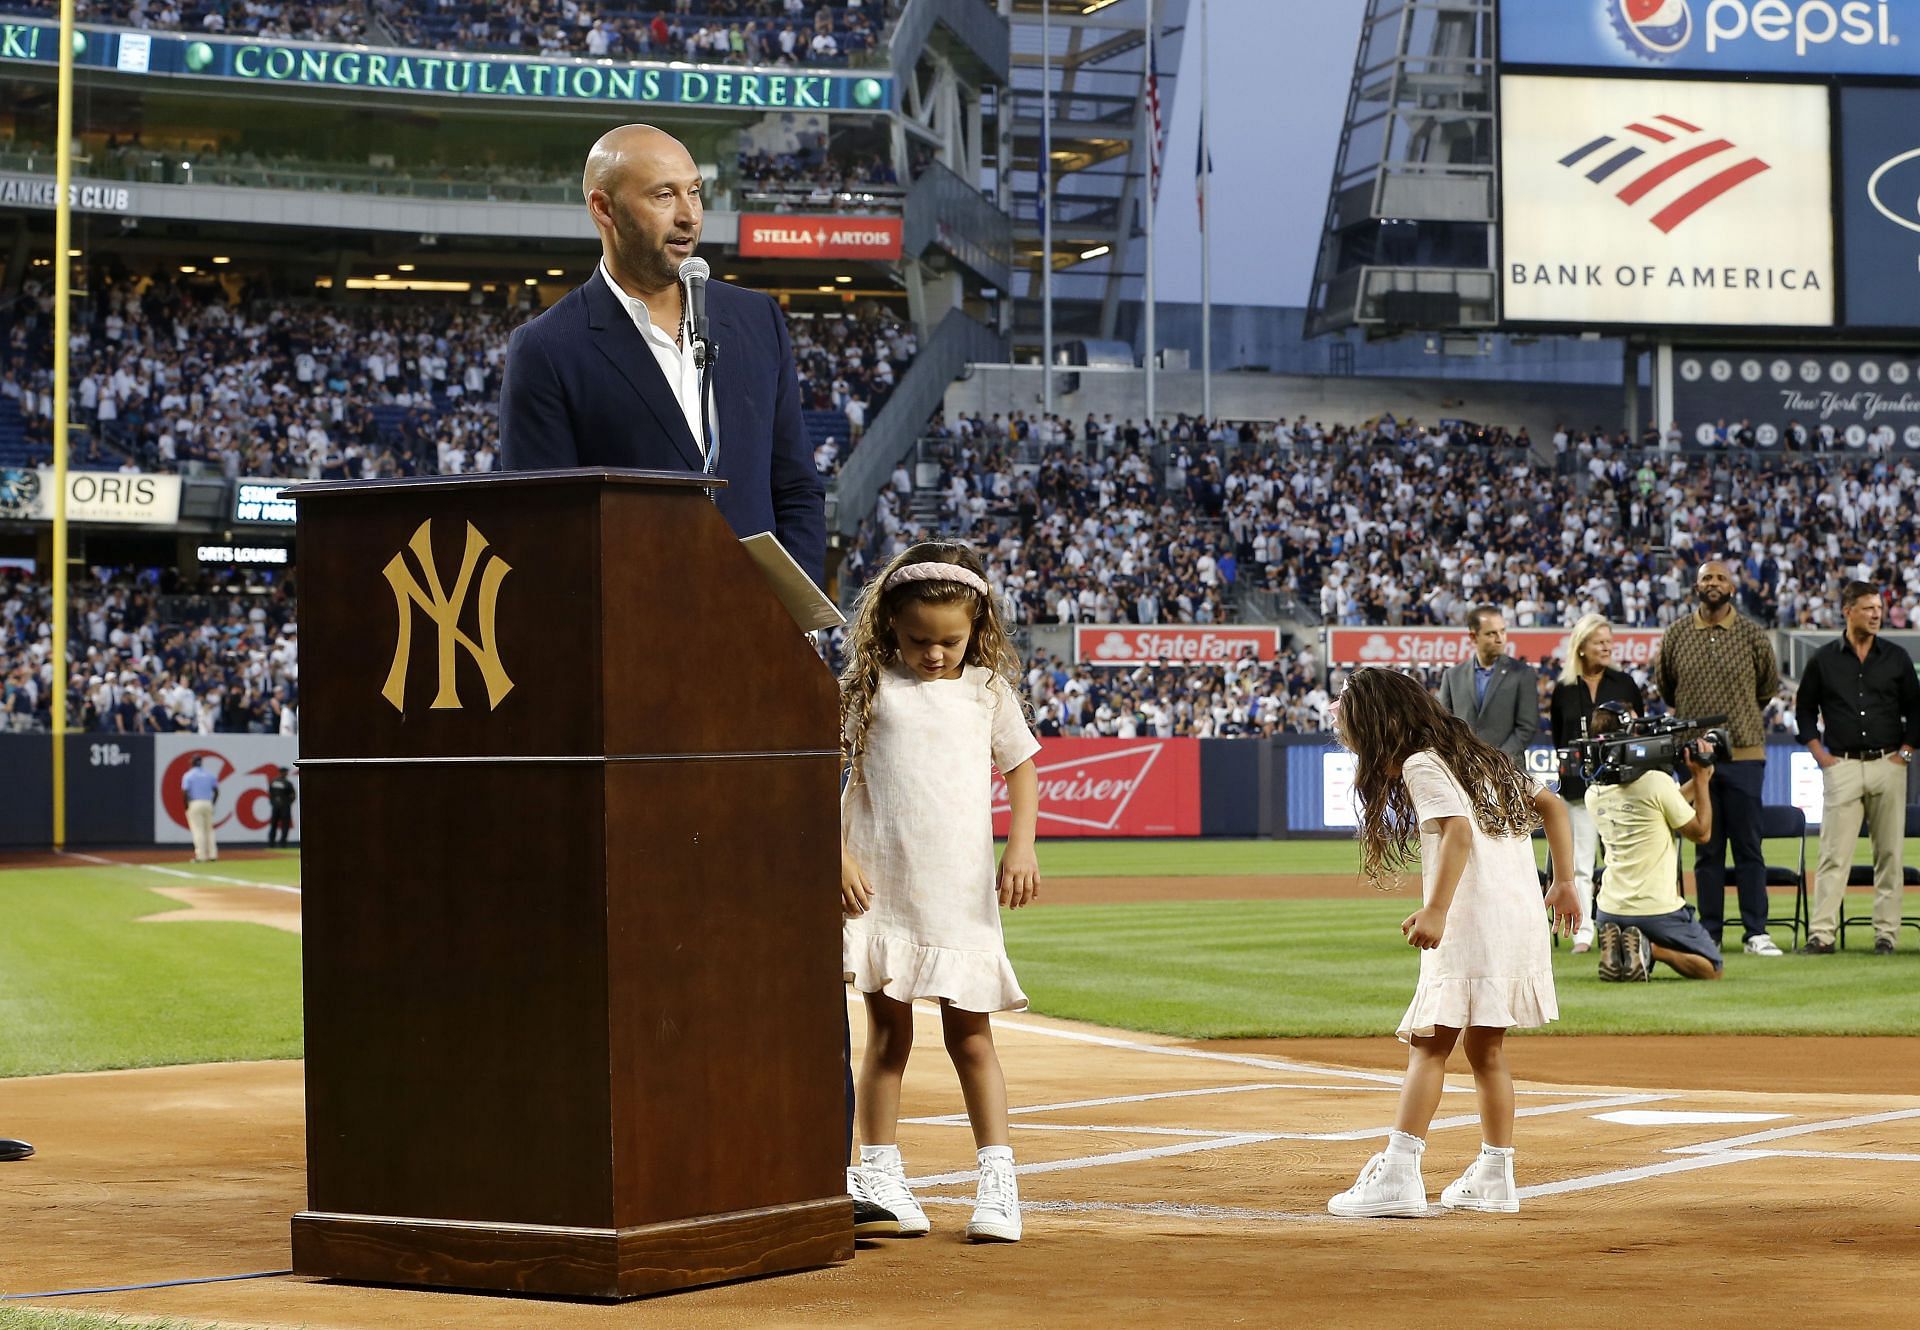 When Derek Jeter was honored to represent Team USA in 2006 World Baseball  Classic